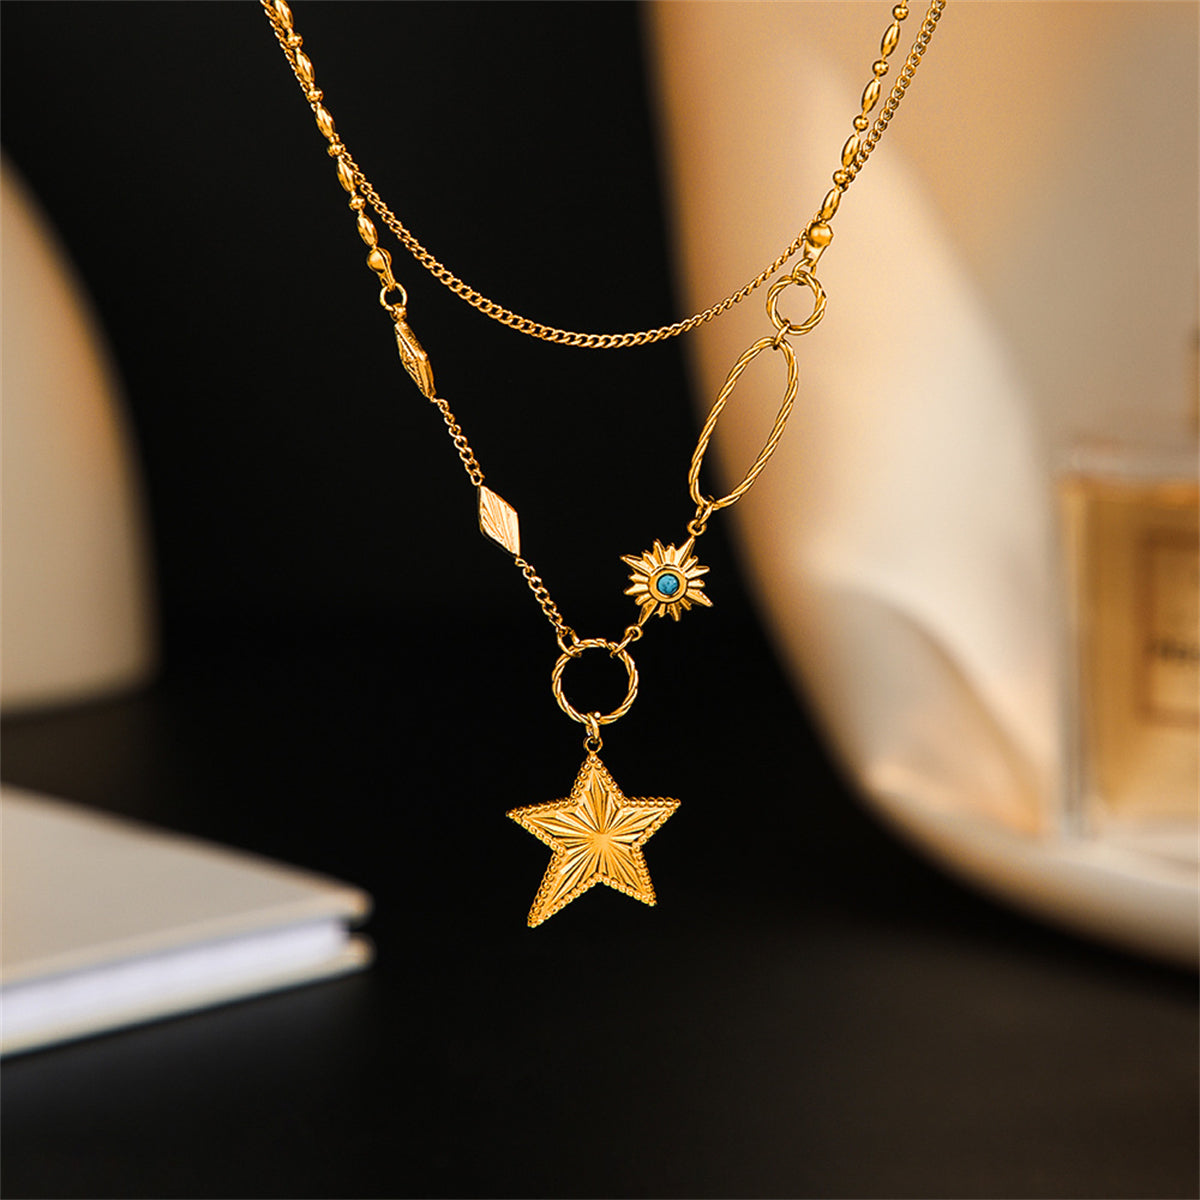 Turquoise & 18K Gold-Plated Star Layered Pendant Necklace